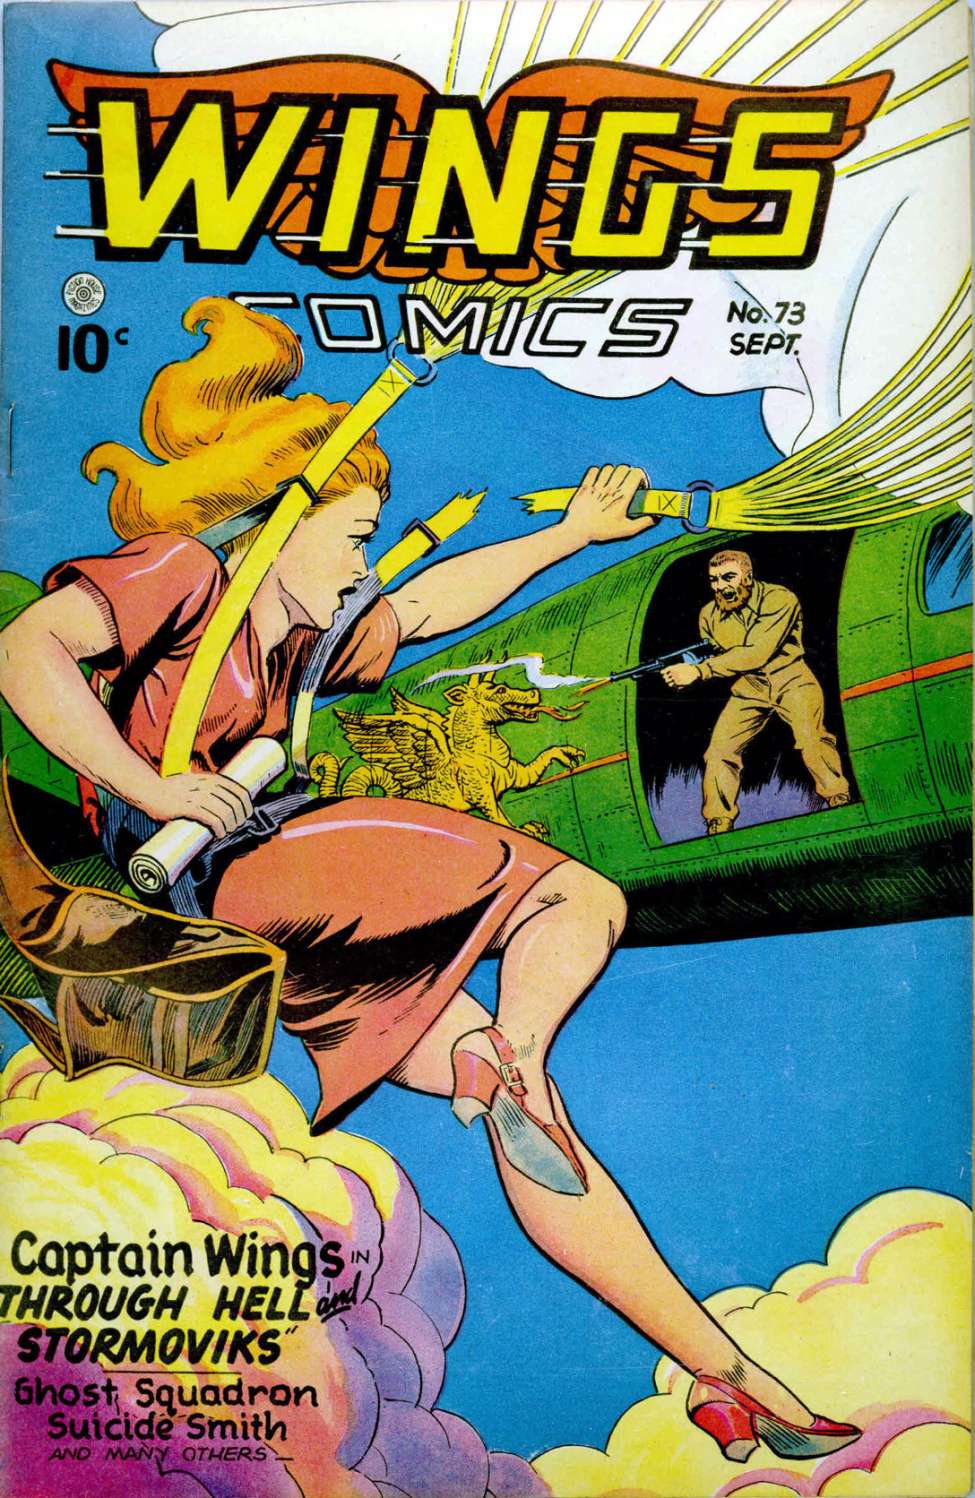 Book Cover For Wings Comics 73 - Version 1